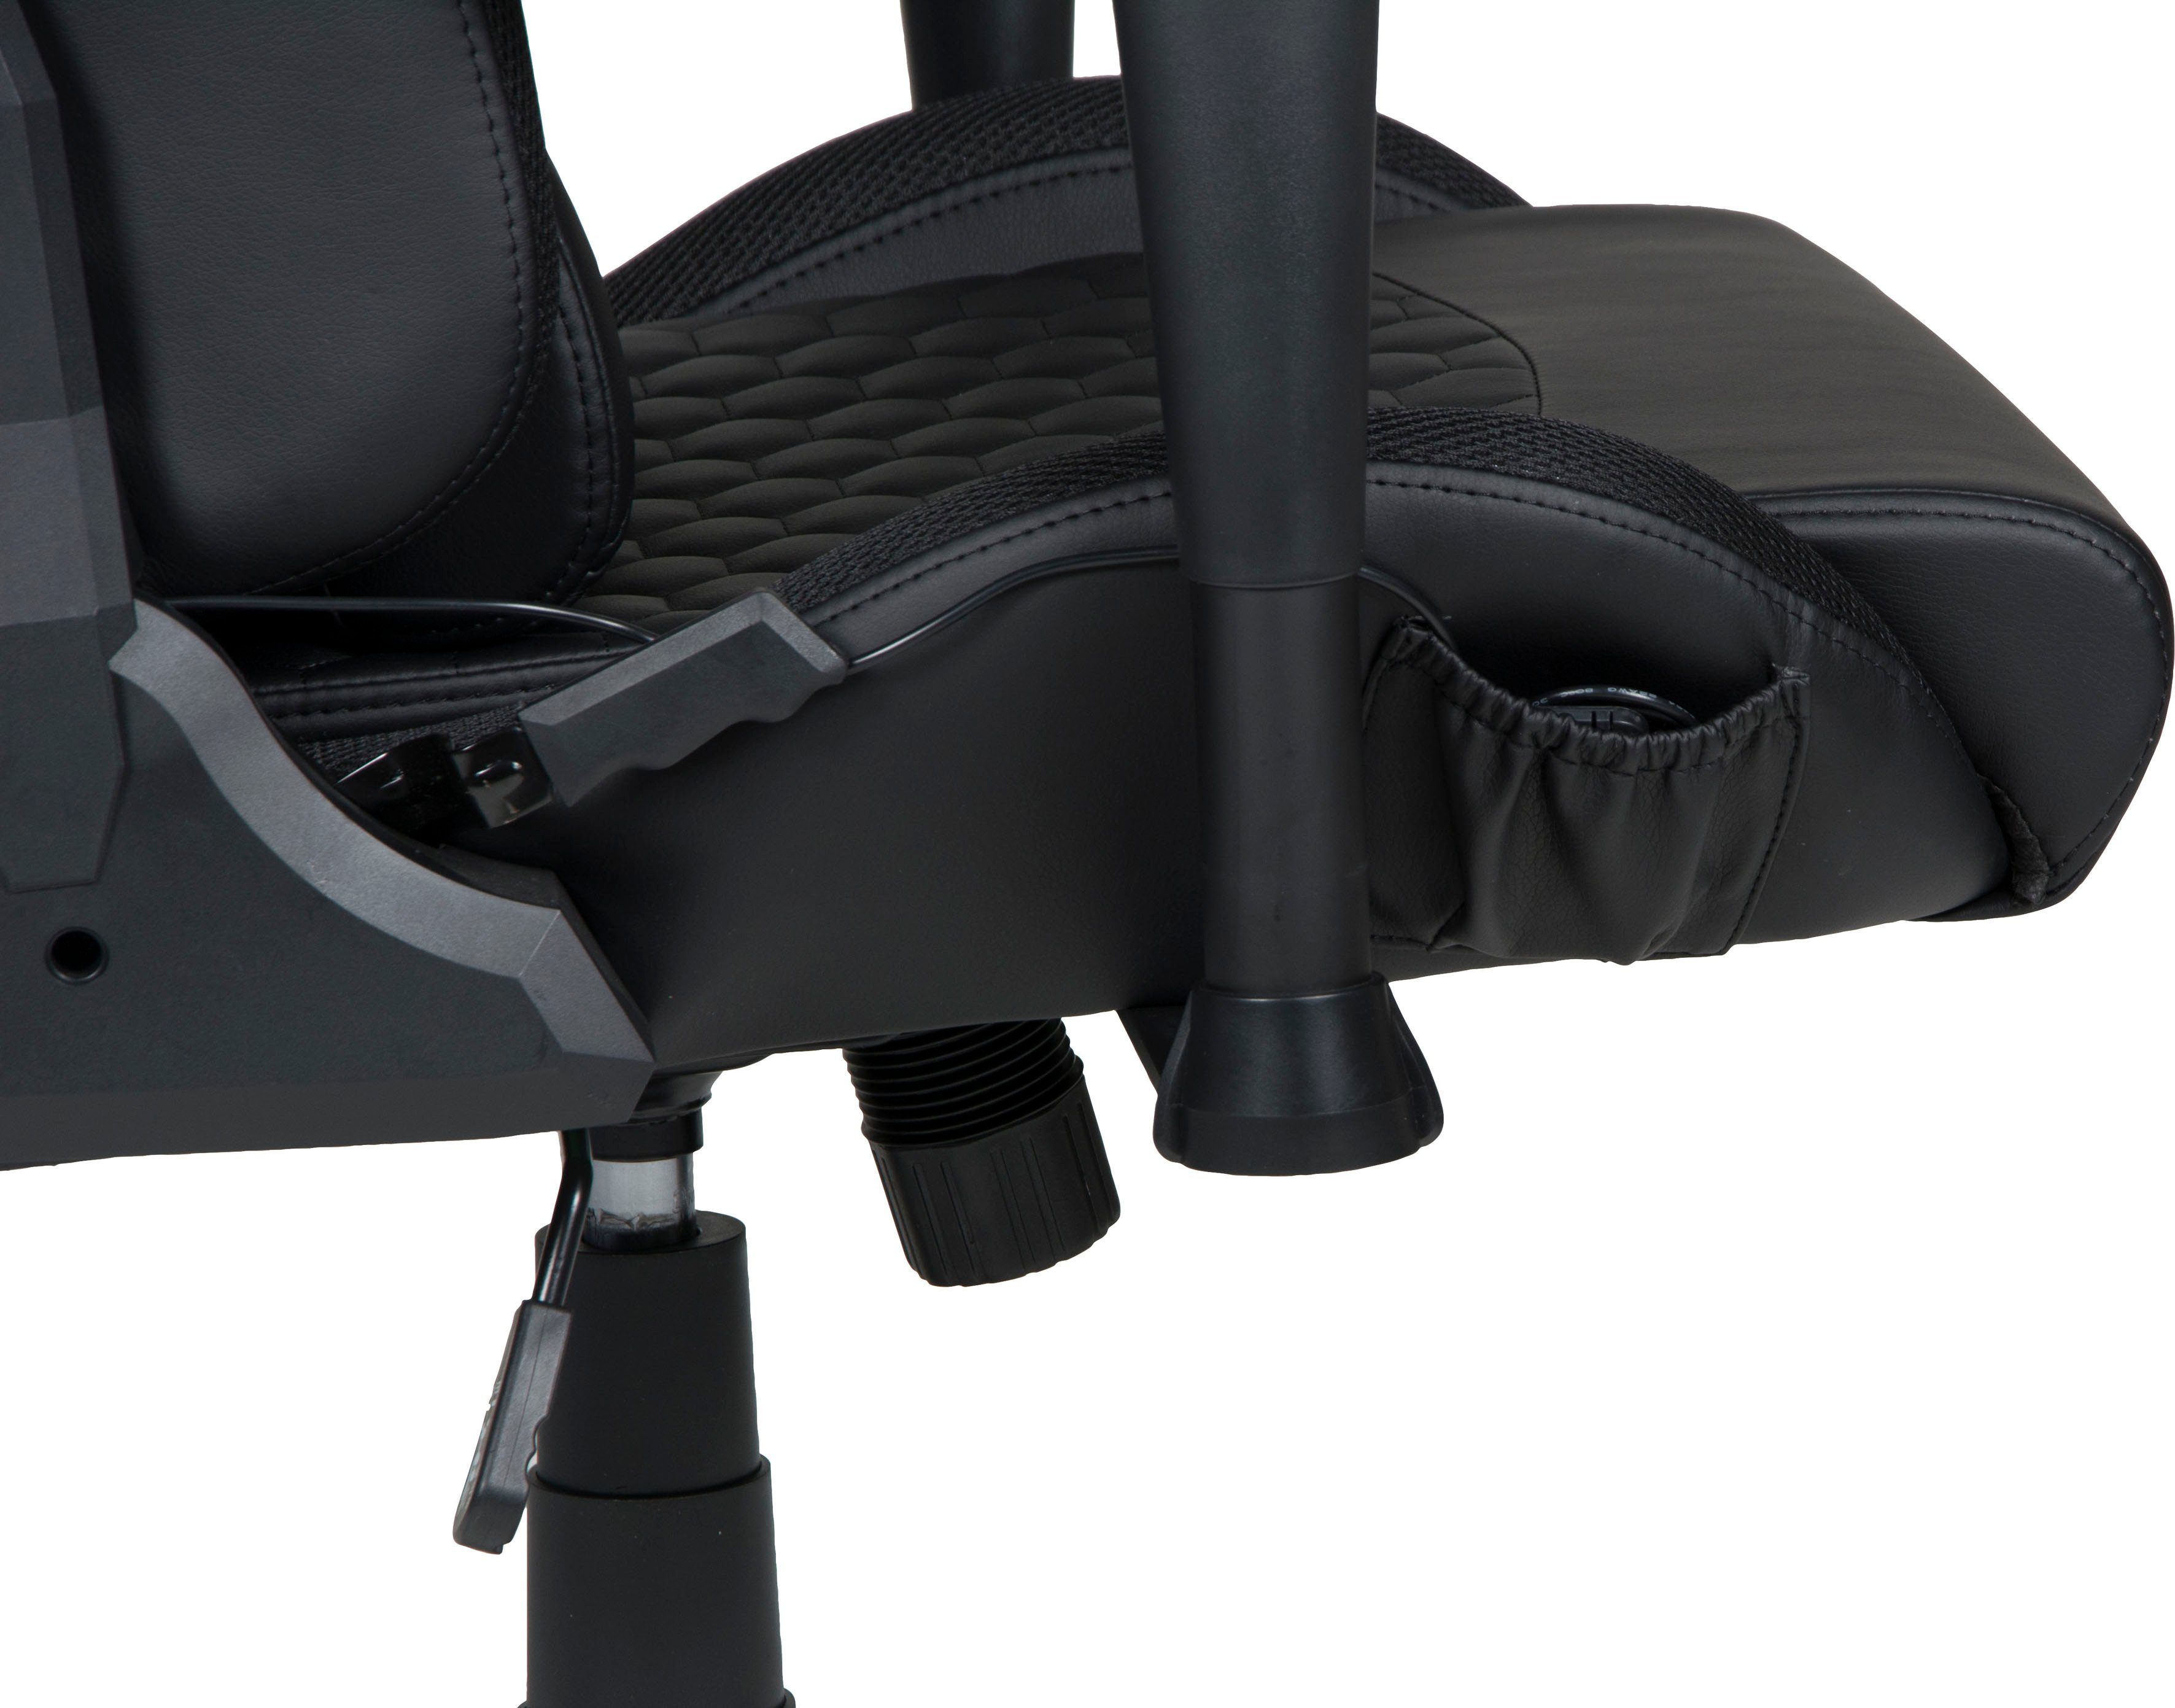 Collection Chefsessel G-10 Wechselbeleuchtung Gaming Game-Rocker Chair Duo LED mit LED,